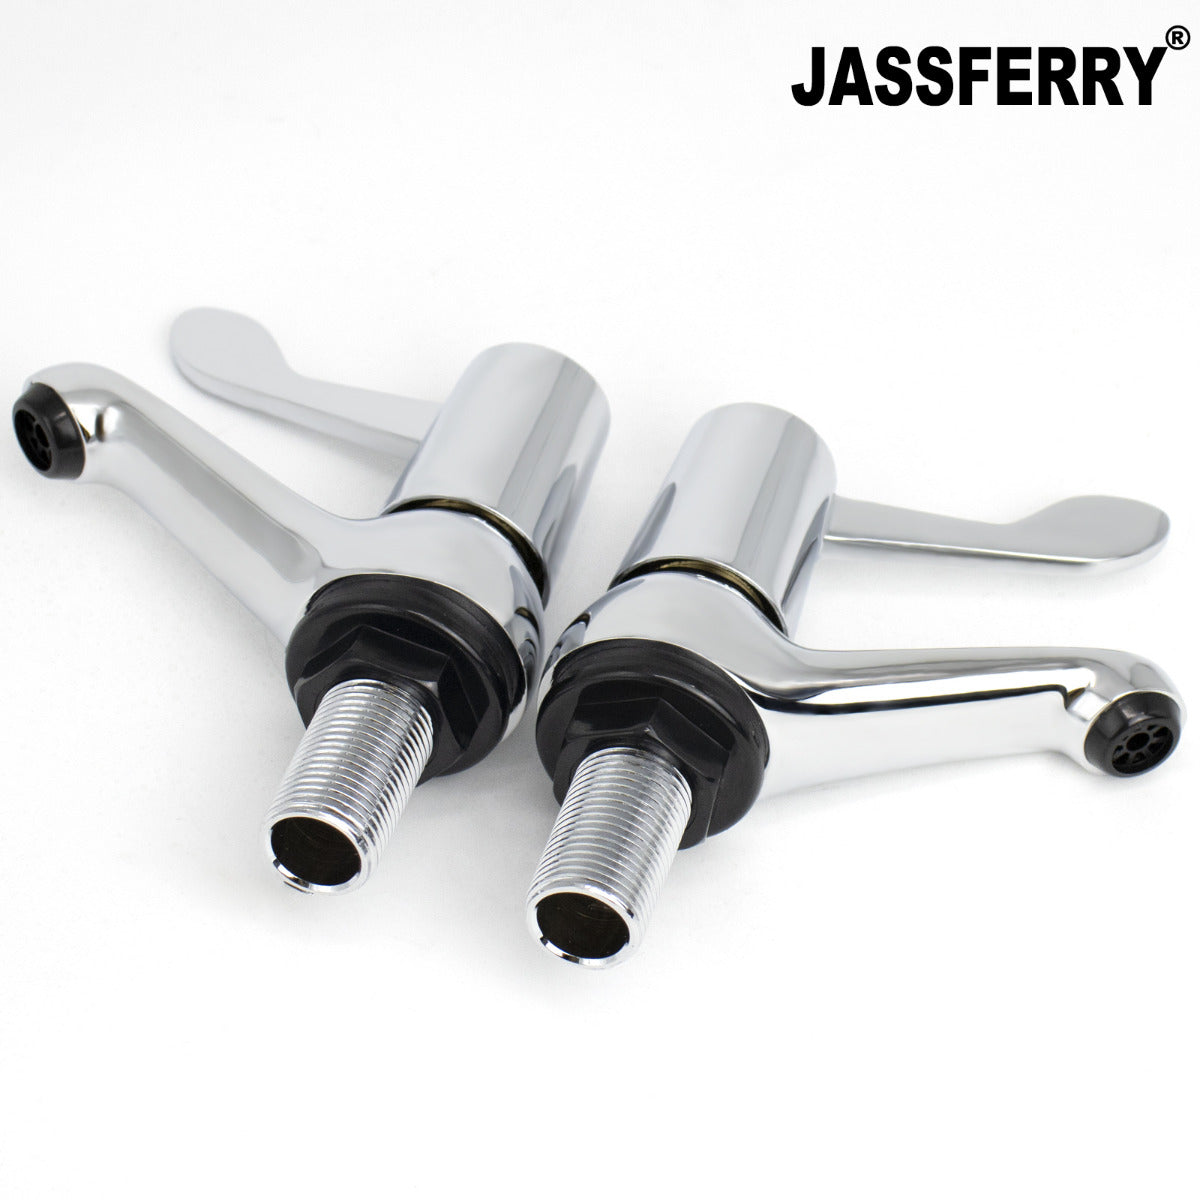 JassferryJASSFERRY 1/2" Basin Taps Pair Traditional Twin Hot & Cold Set FaucetBasin Taps